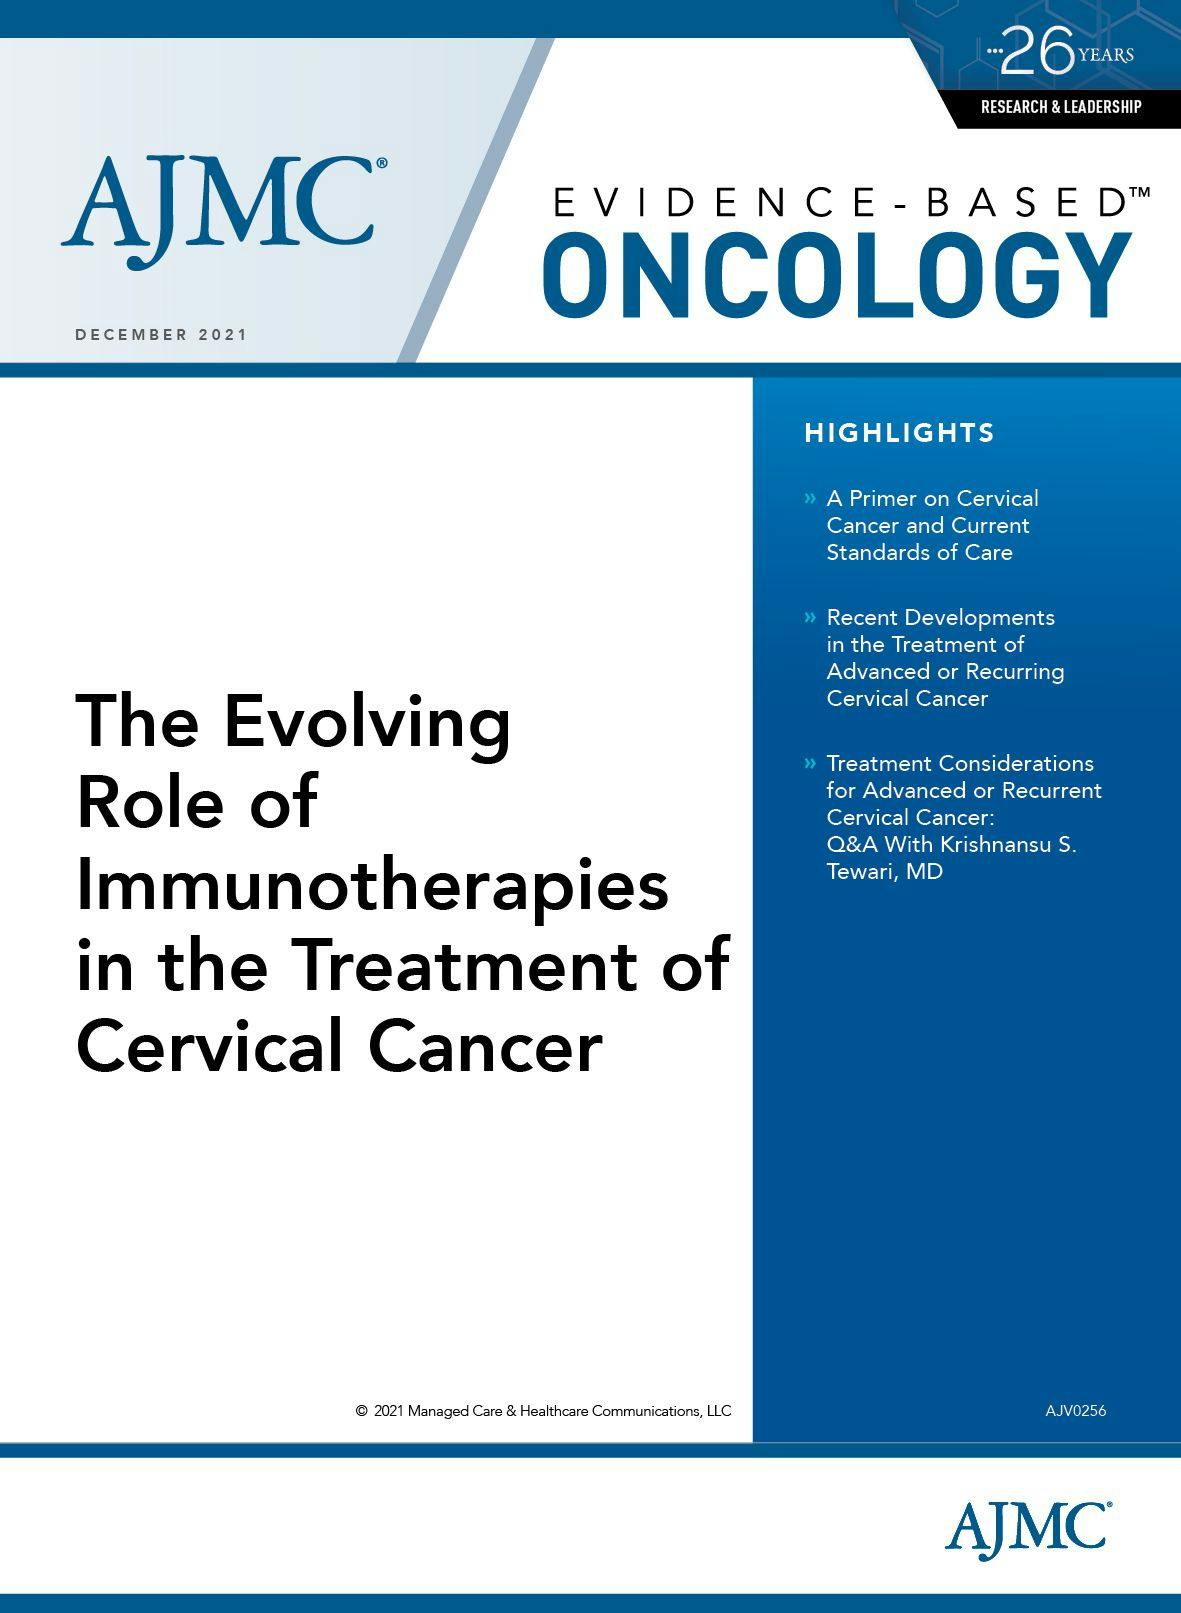 The Evolving Role of Immunotherapies in the Treatment of Cervical Cancer